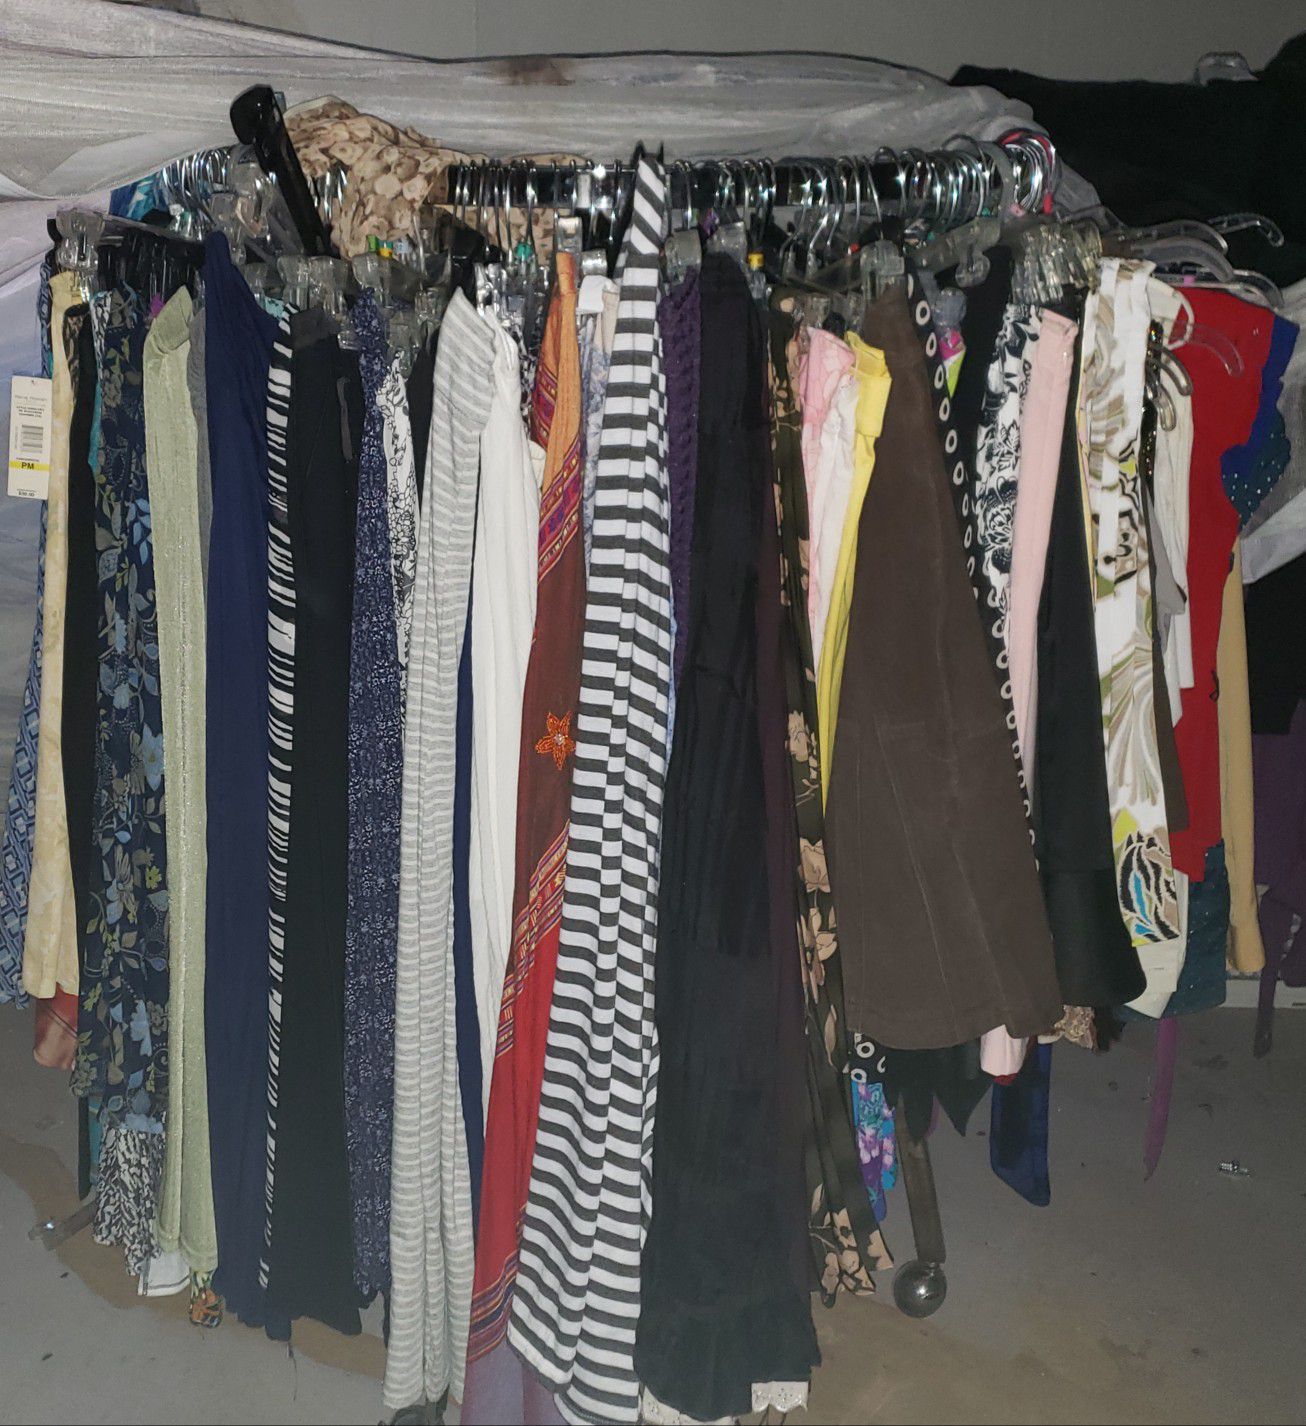 Galore of Women's Clothing, Dresses, Shoes & more...